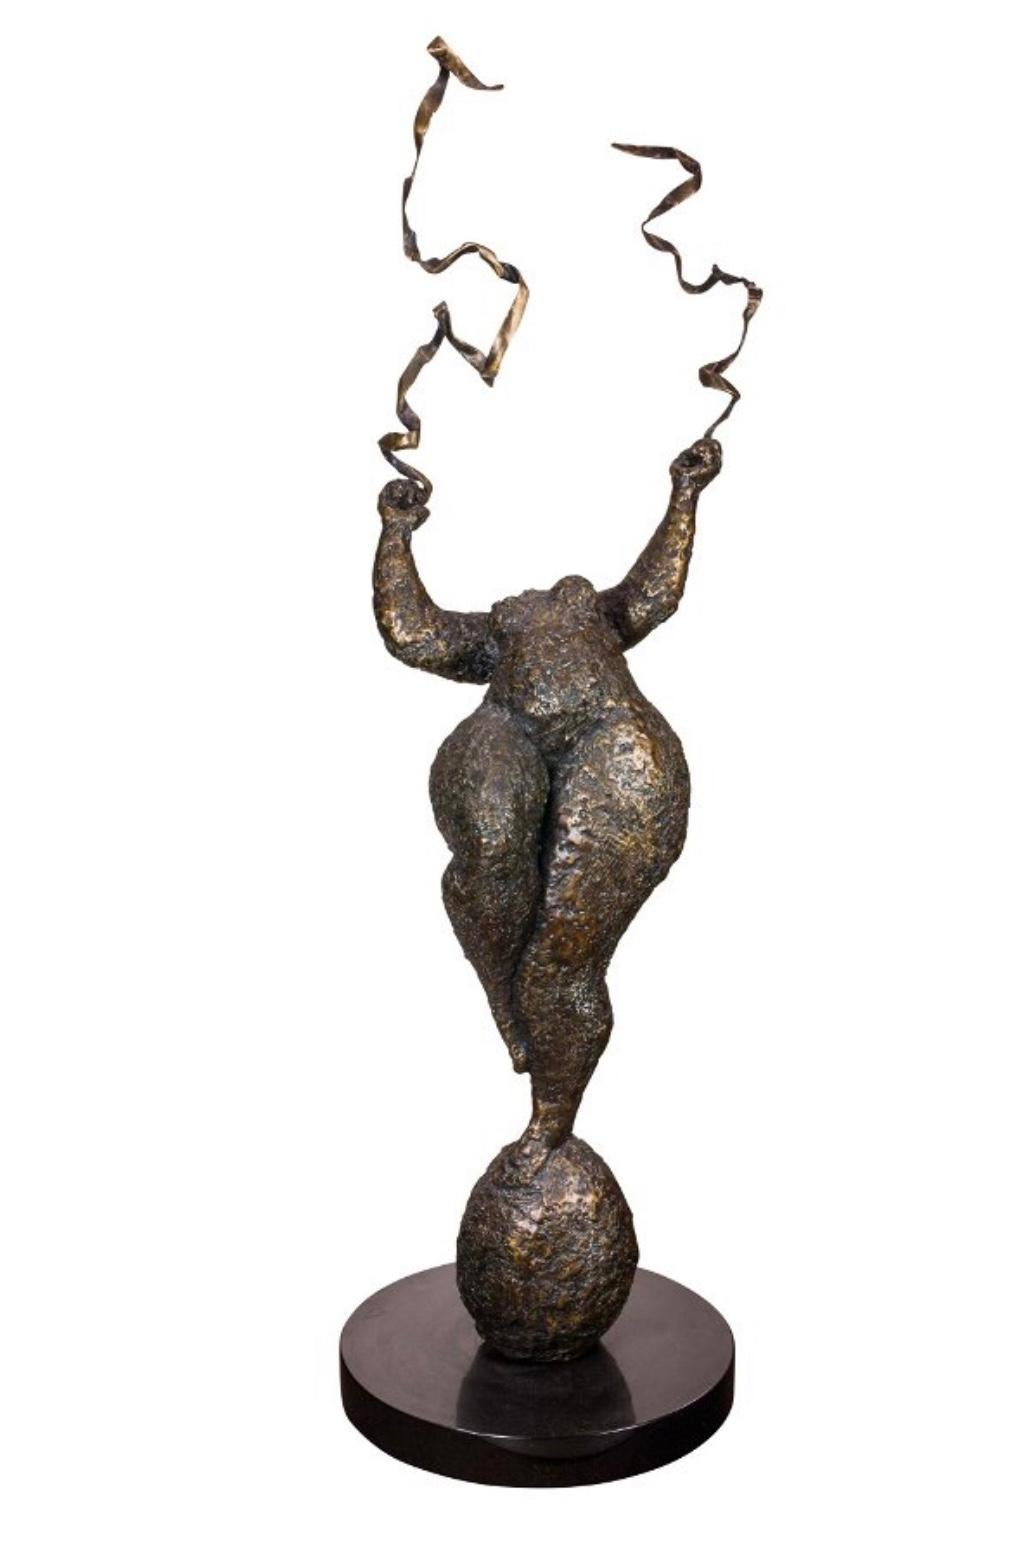 Wonderful whimsical nude female dancing with a ribbon. Large and impressive at 52 inches tall, this work is signed on the base Rowley. By the noted Californian artist Ramona Rowley. Likely late 20th century. In good condition. The stone base rotates